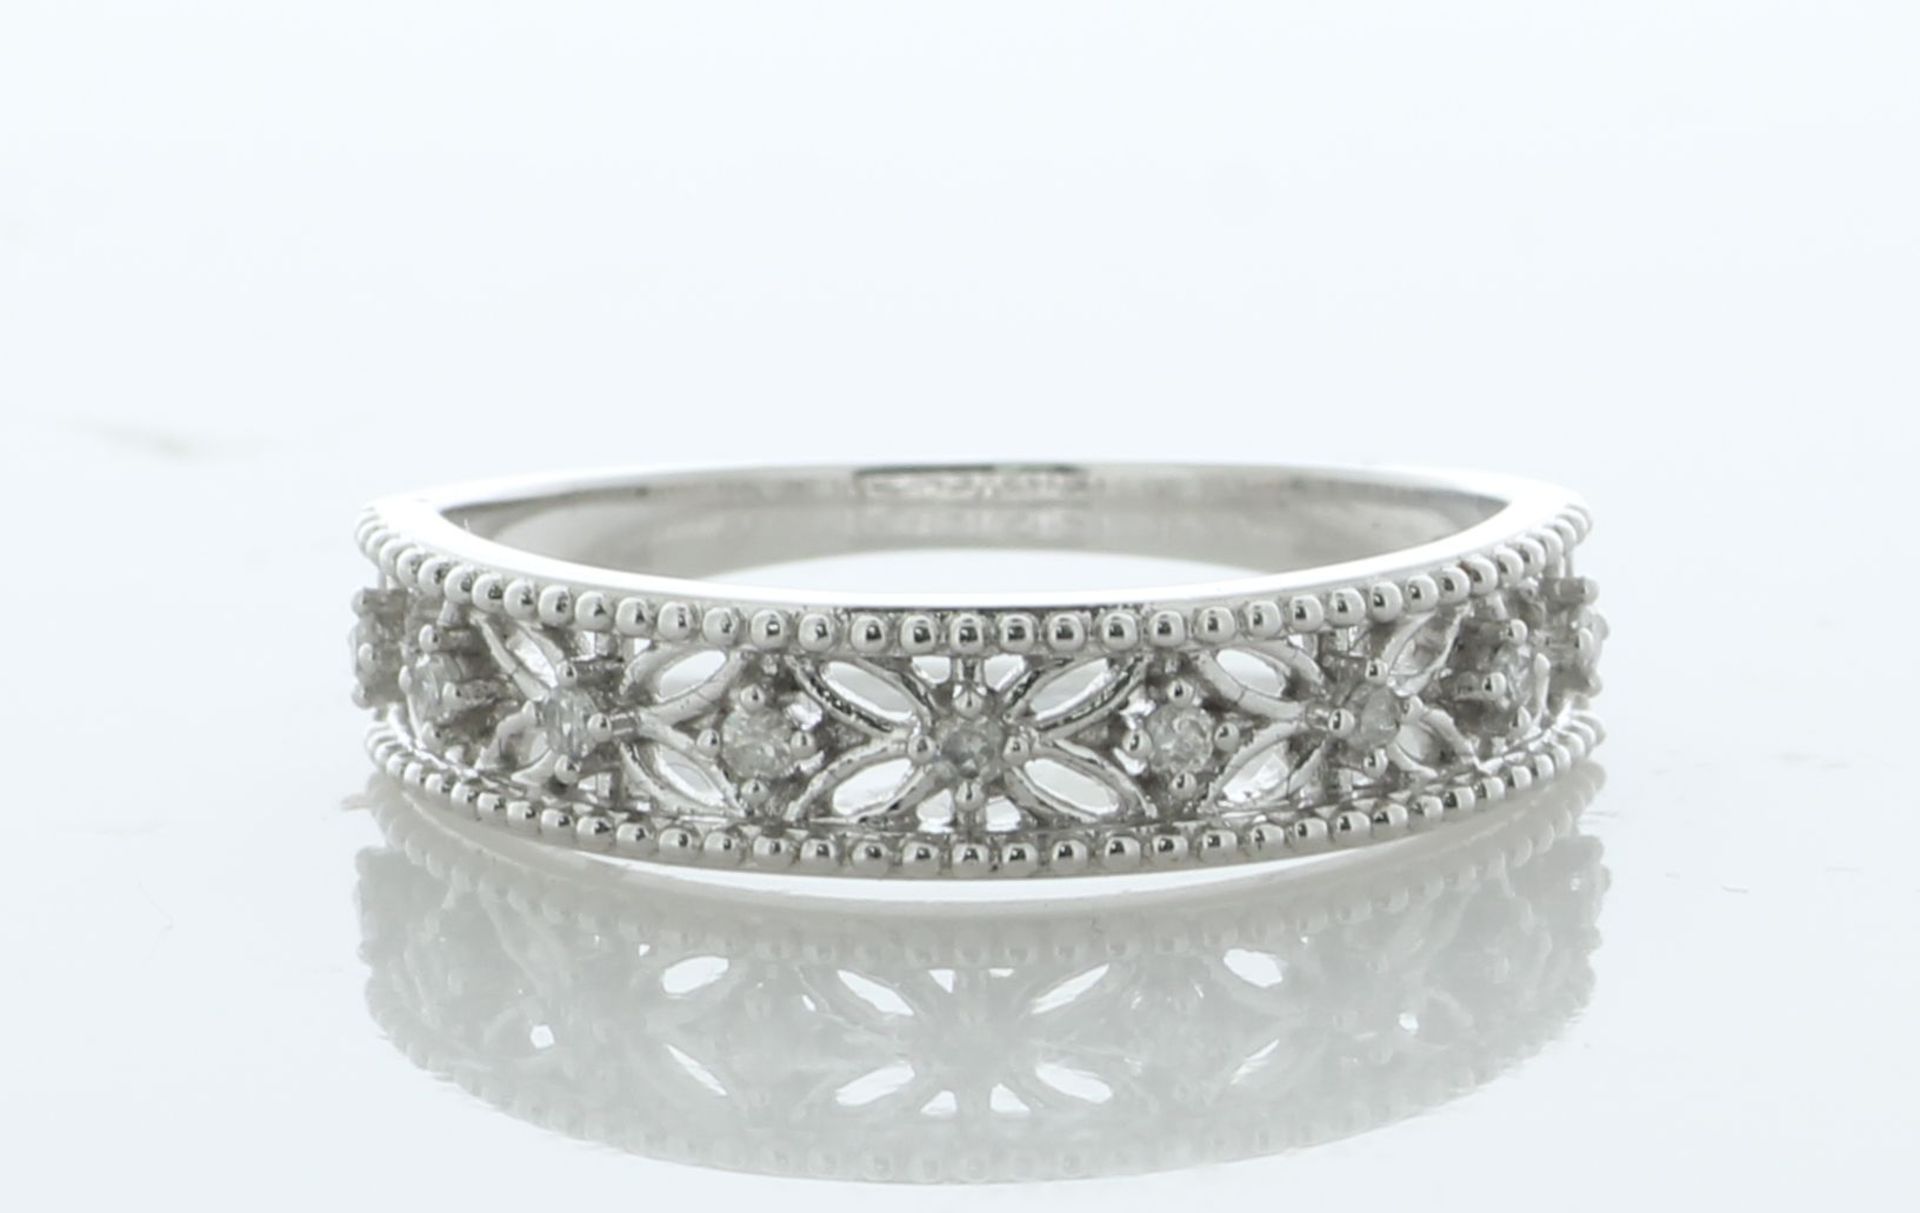 10ct White Gold Illusion Set Semi Eternity Diamond Ring 0.16 Carats - Valued By IDI £1,995.00 - This - Image 3 of 5